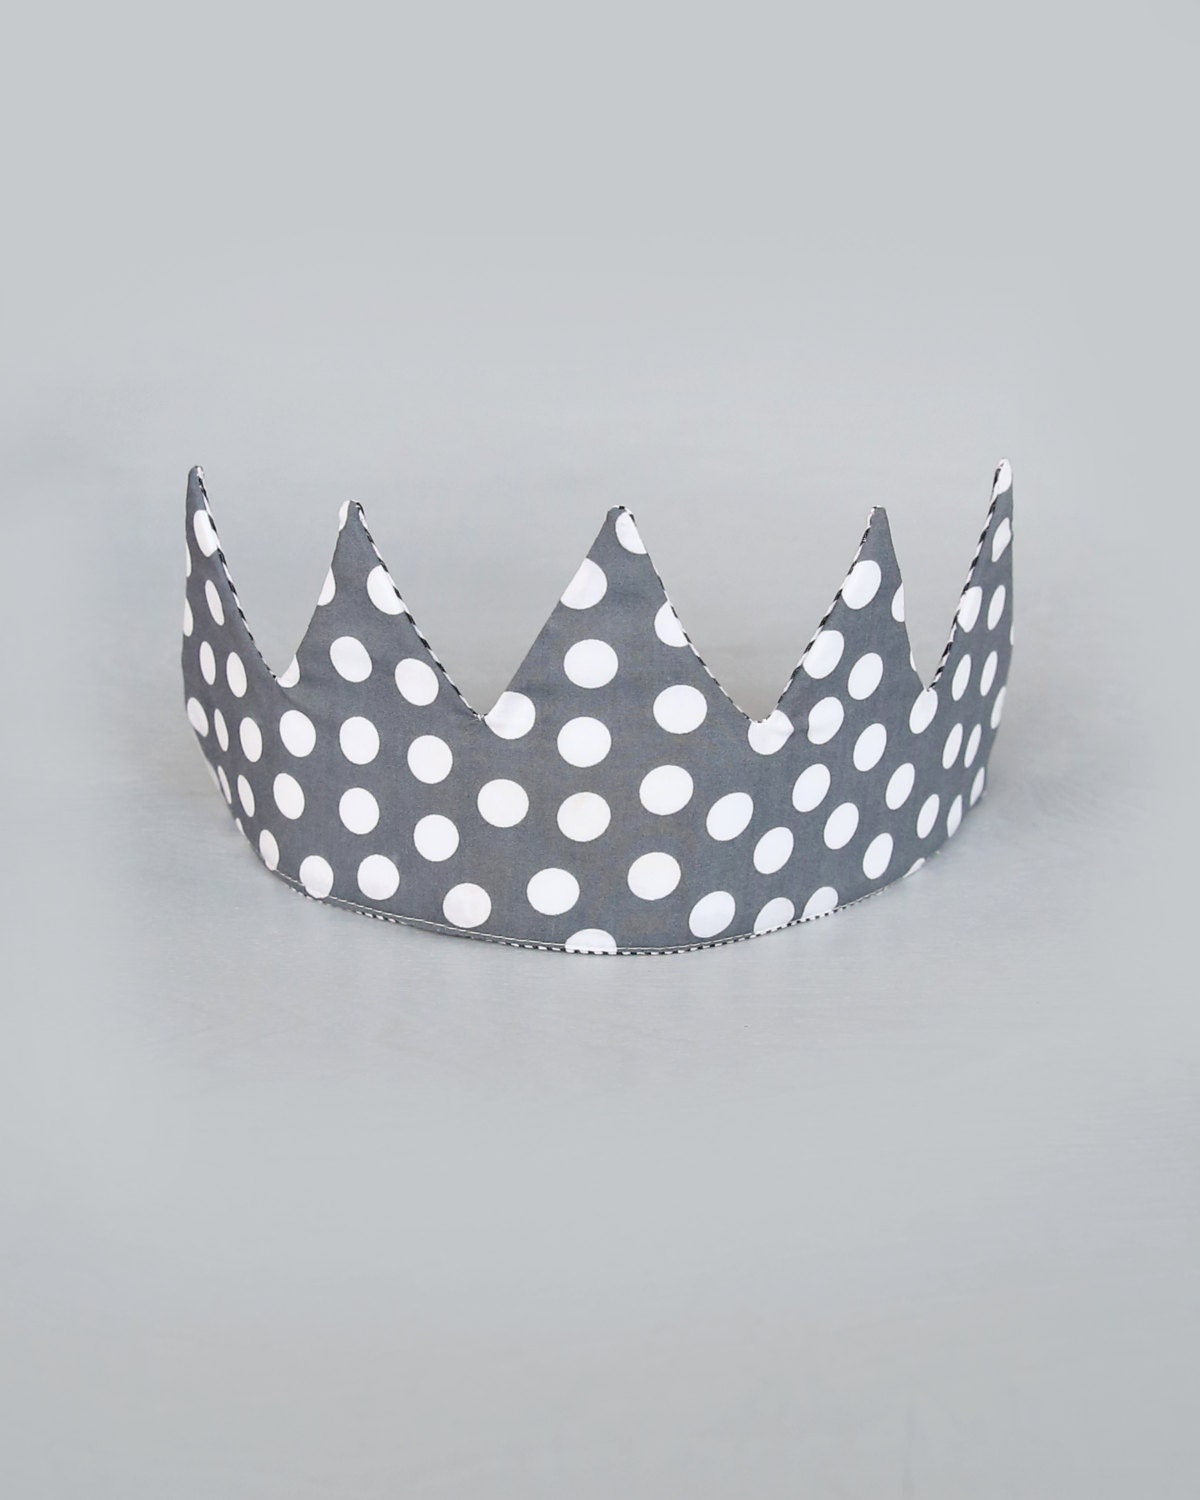 Dress Up Crown - Sequin Crown - Birthday Crown - Gray Polka Dots Reverse Gray Stripes Crown - Fits all